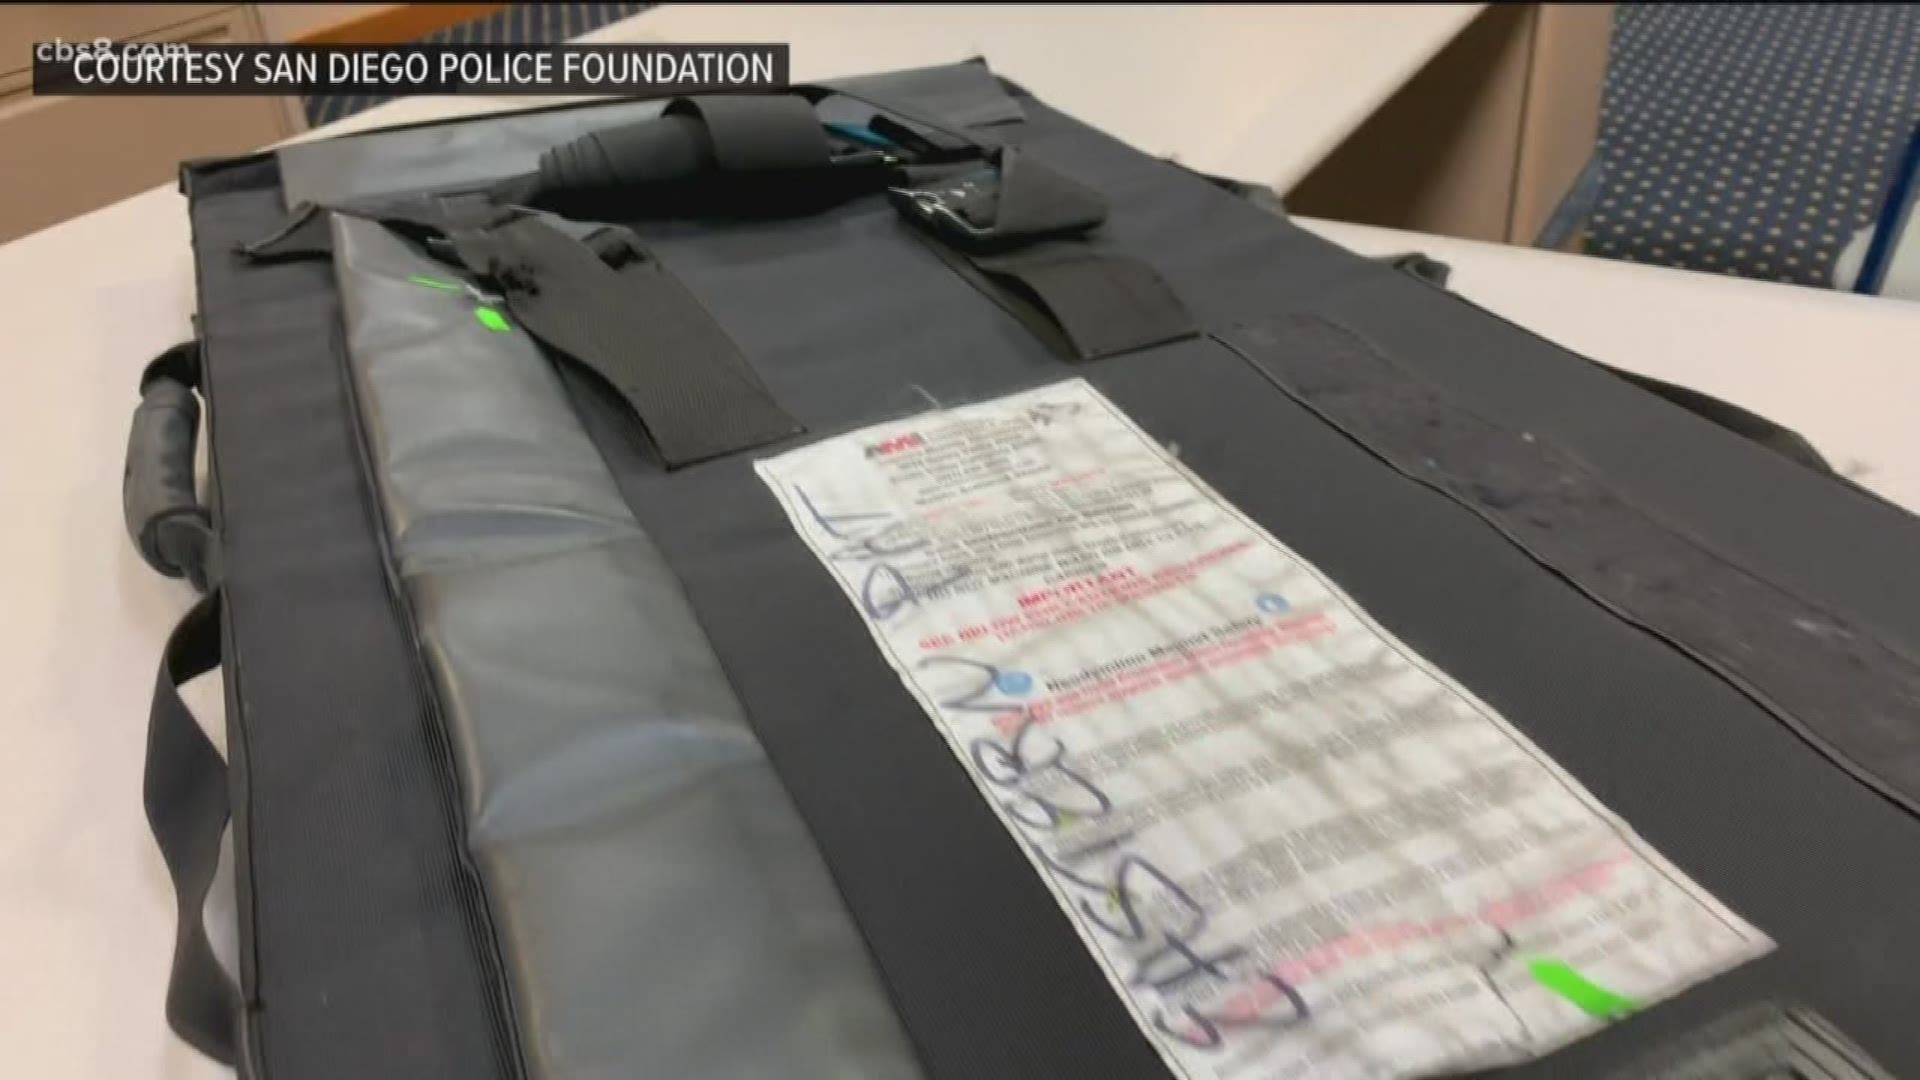 A heart stopping video showing San Diego police taking heavy fire during an operation last year was made public recently, and many were surprised to learn that a crucial piece of life-saving equipment was used during the raid was not city issued.